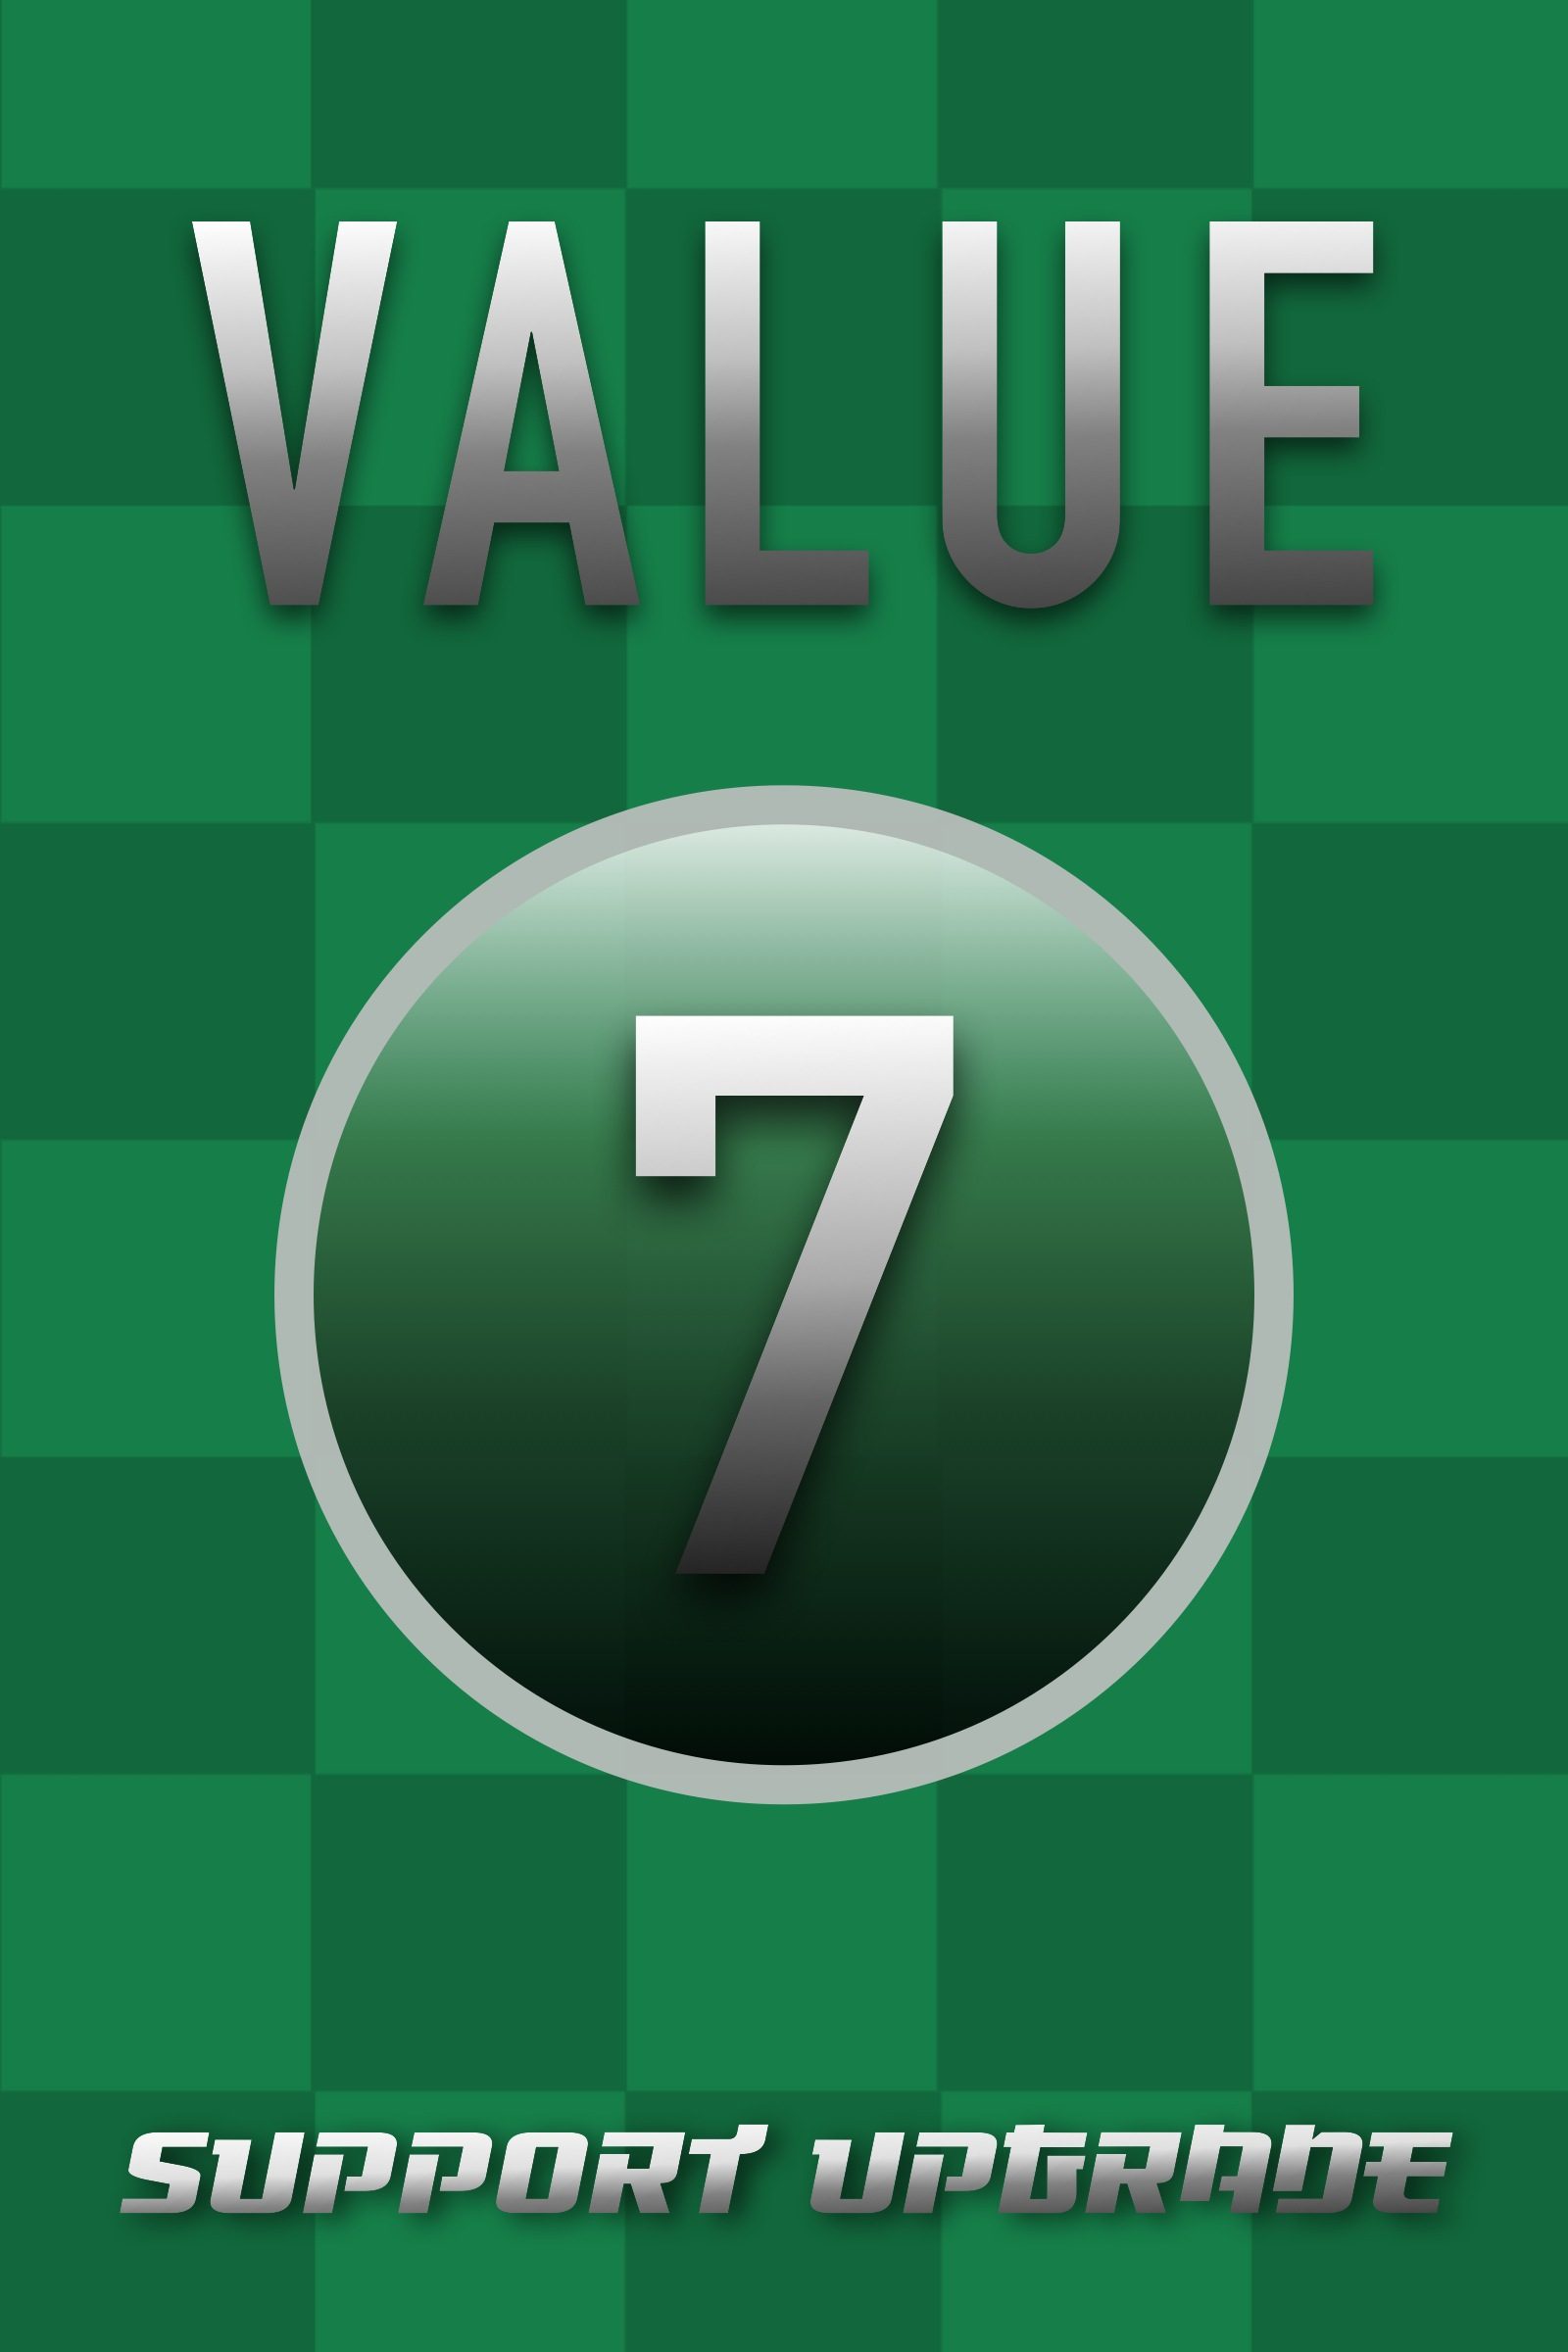 Support Upgrade for Value7